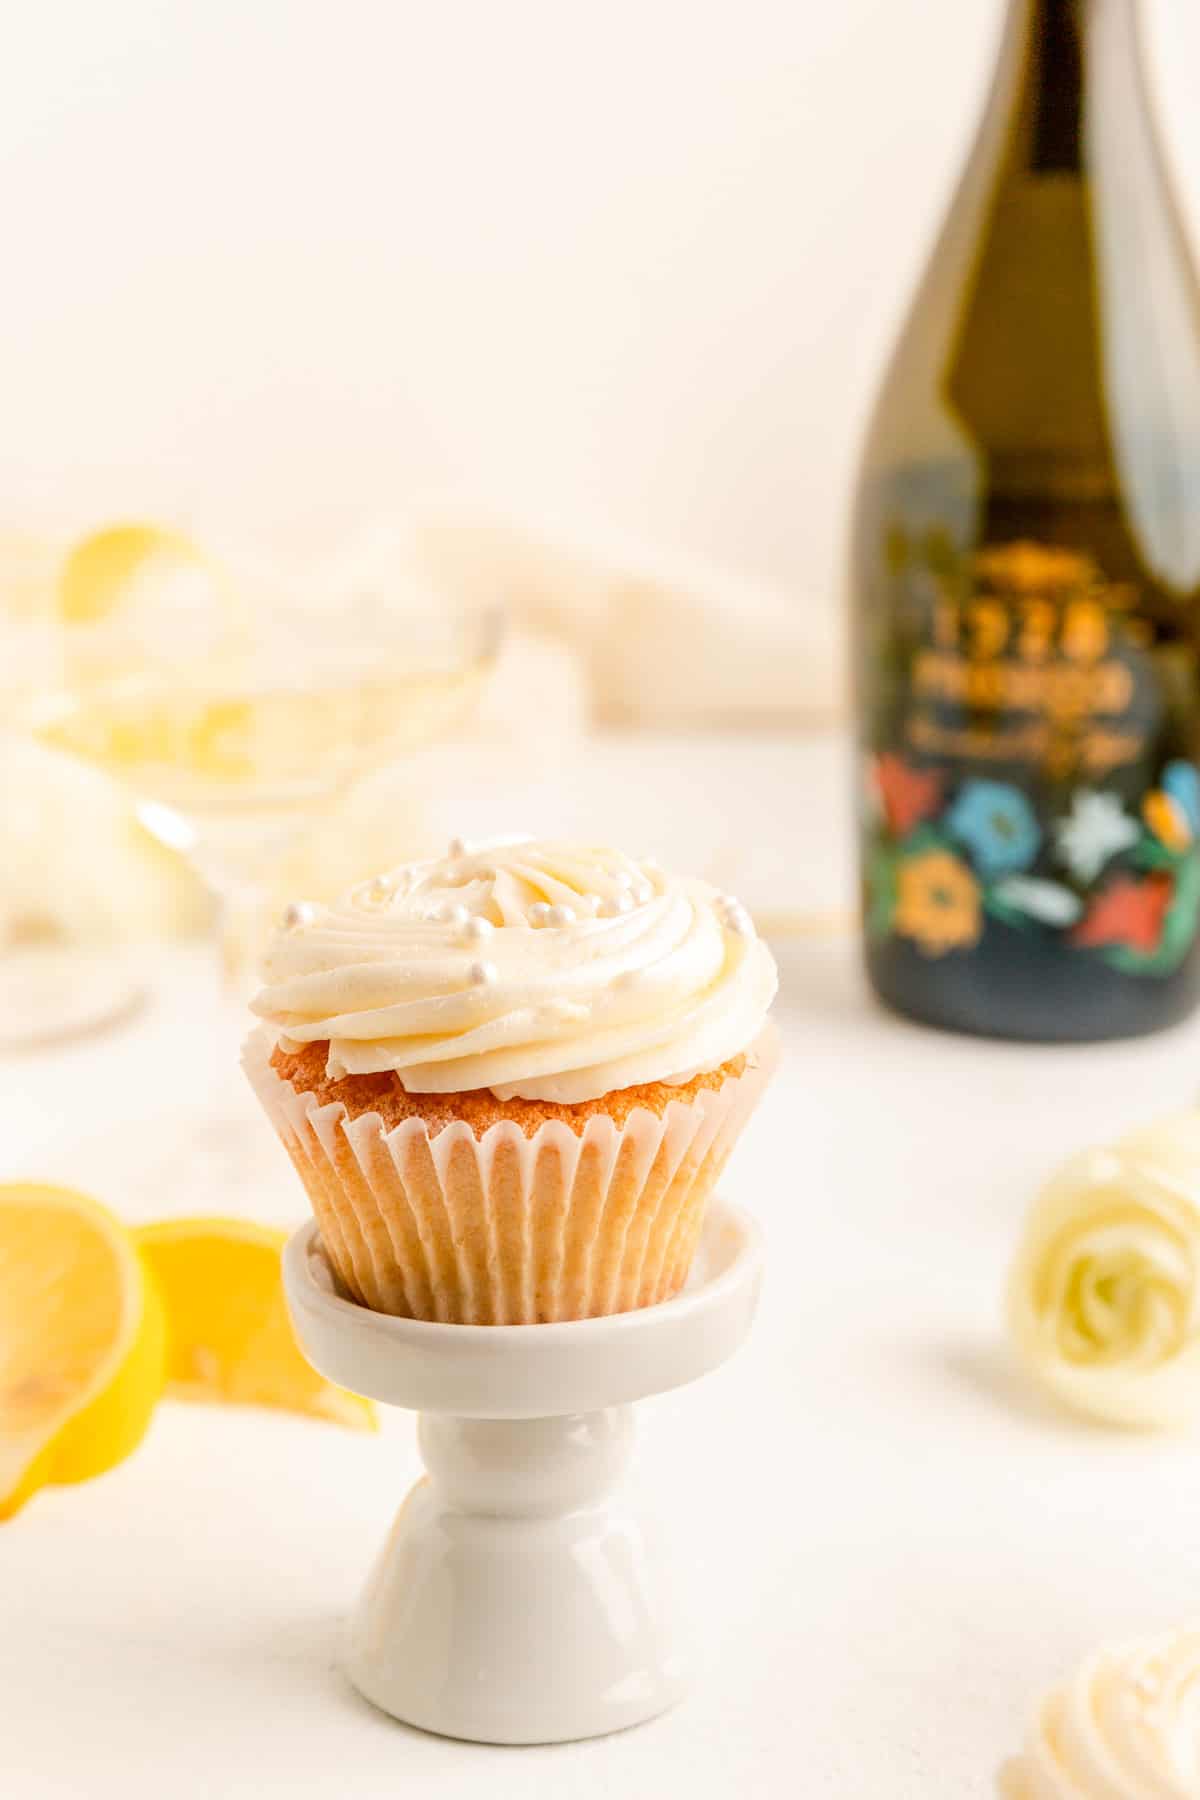 A single cupcake on small stand with lemon flowers and a green prosecco bottle behind it.